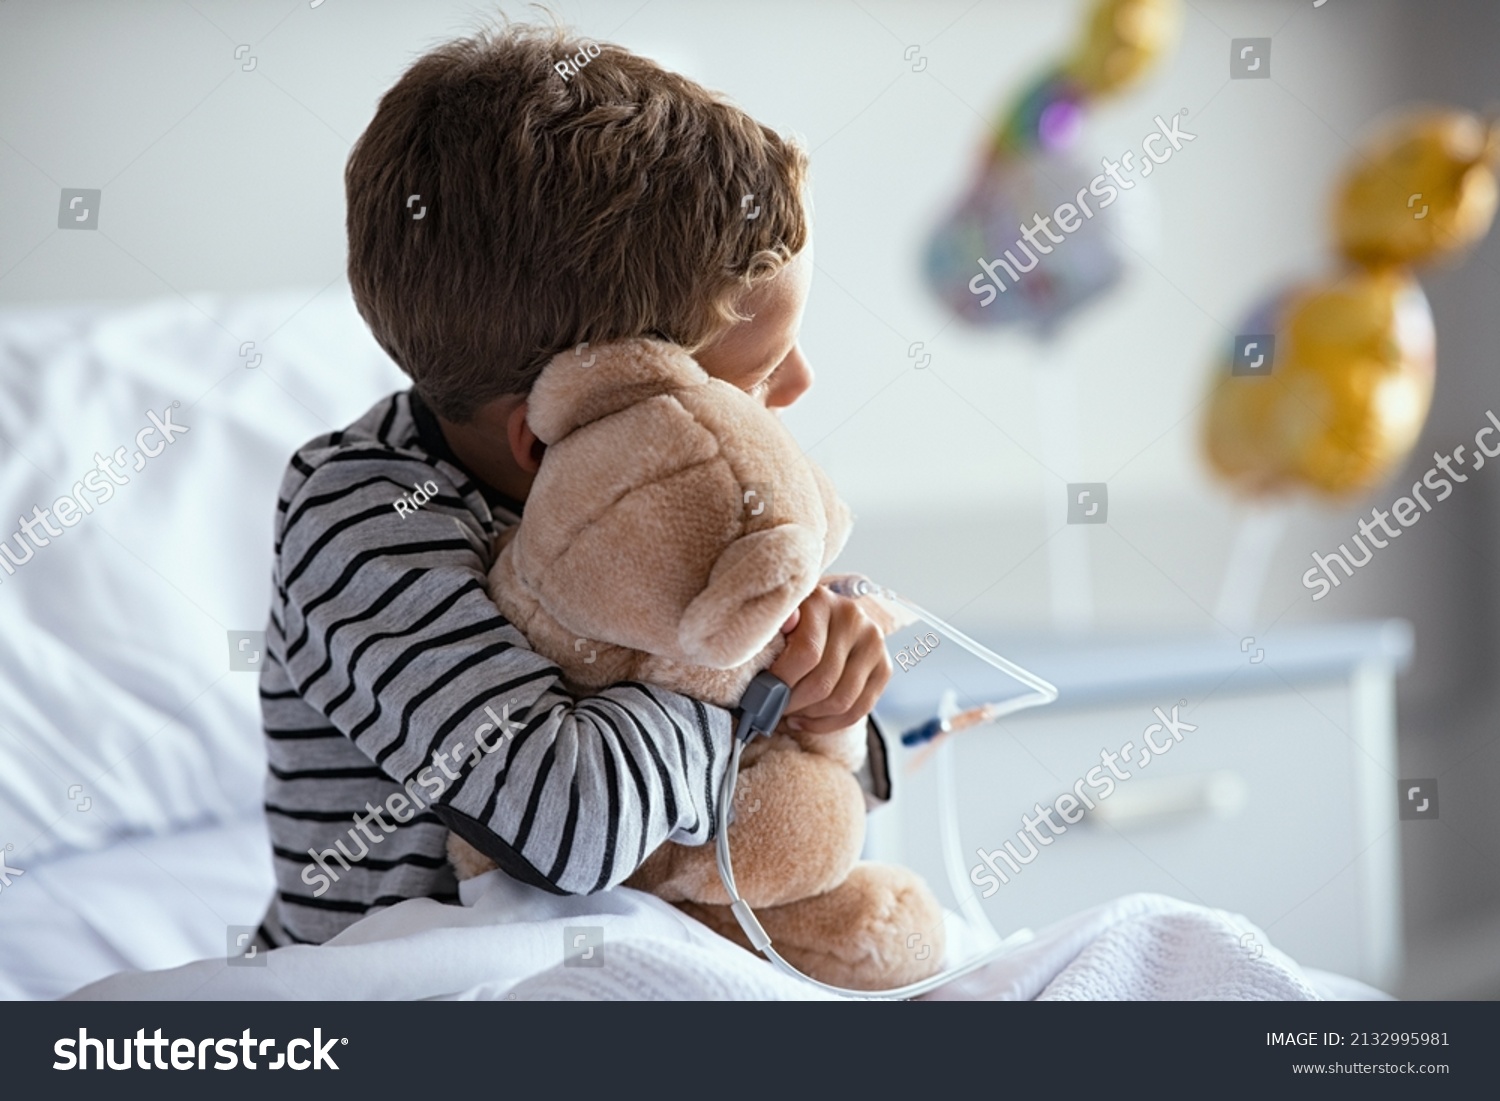 Rear view of scared little boy with intravenous drip in hand hugging teddy bear sitting on hospital bed. Sick lonely child looking through the window in clinic pediatric ward before the surgery. #2132995981